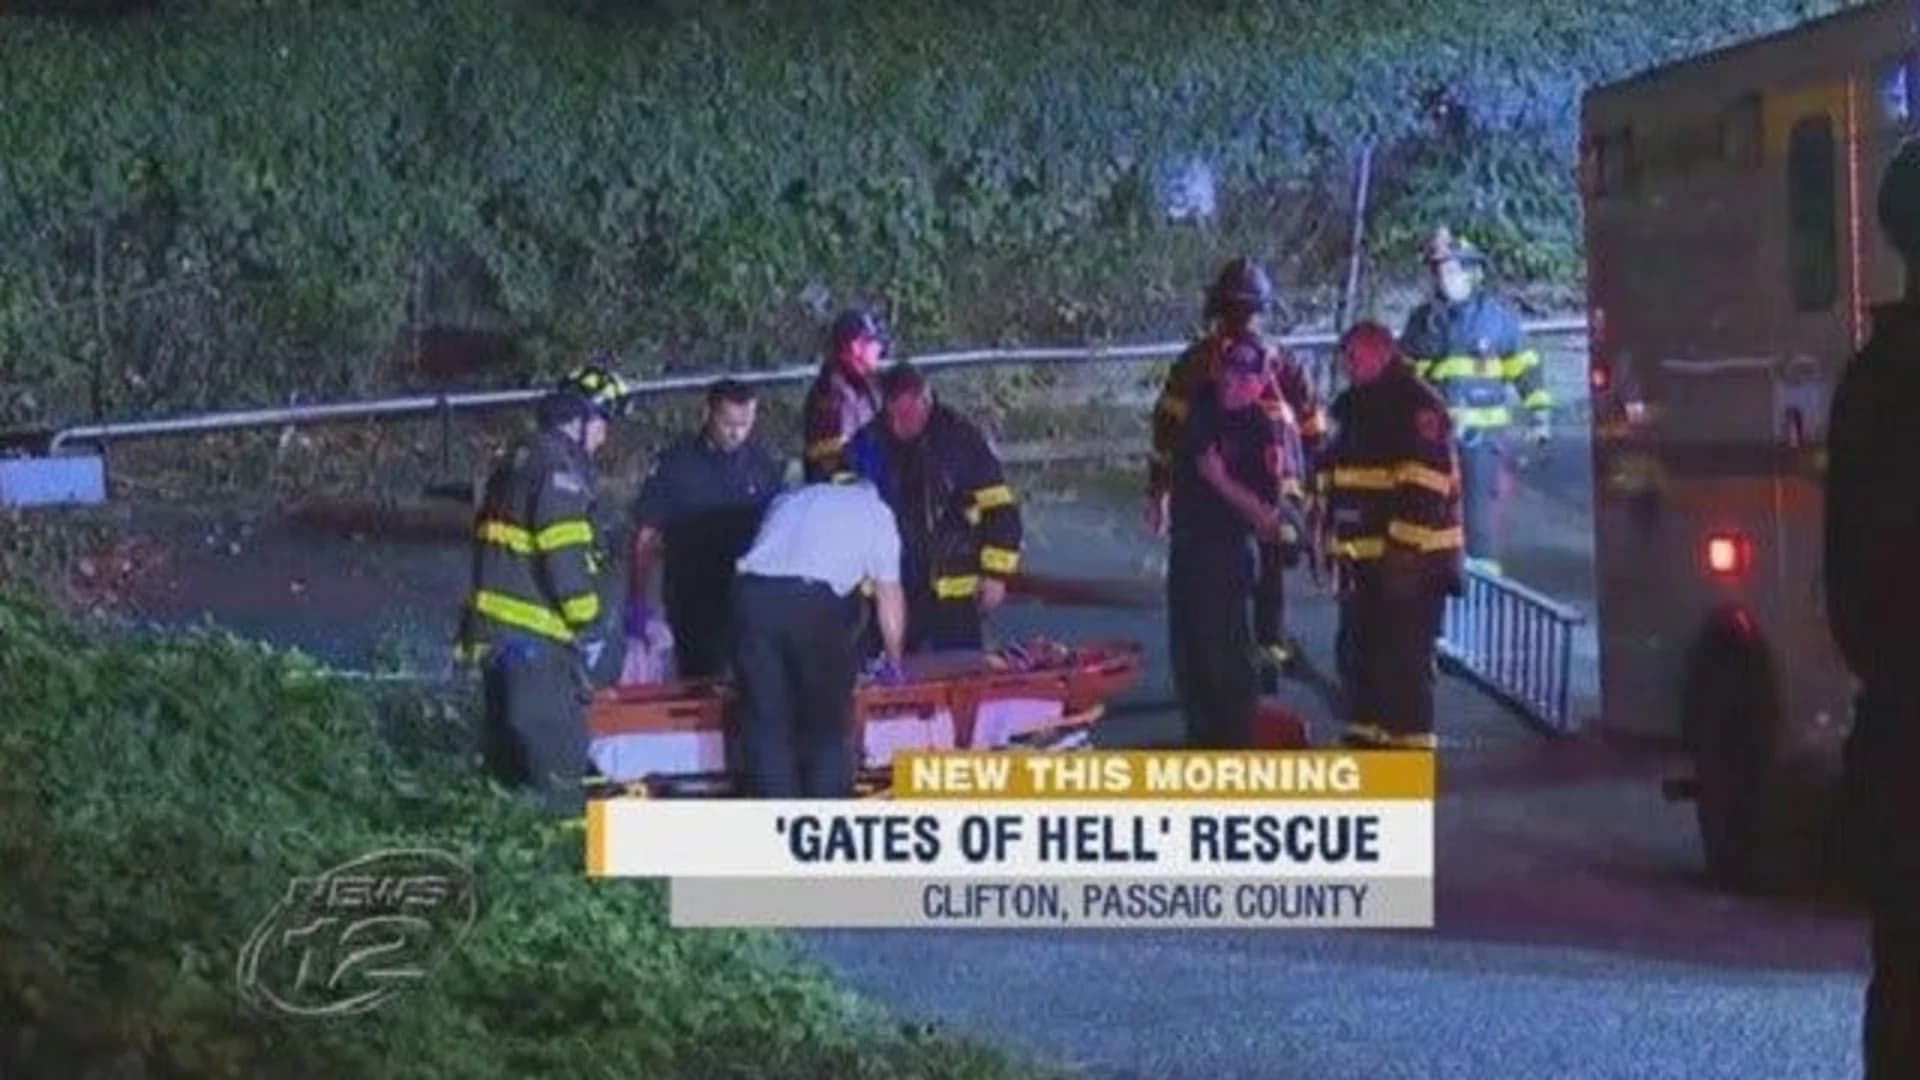 Man hospitalized after falling 20 feet at Clifton’s ‘Gates of Hell’